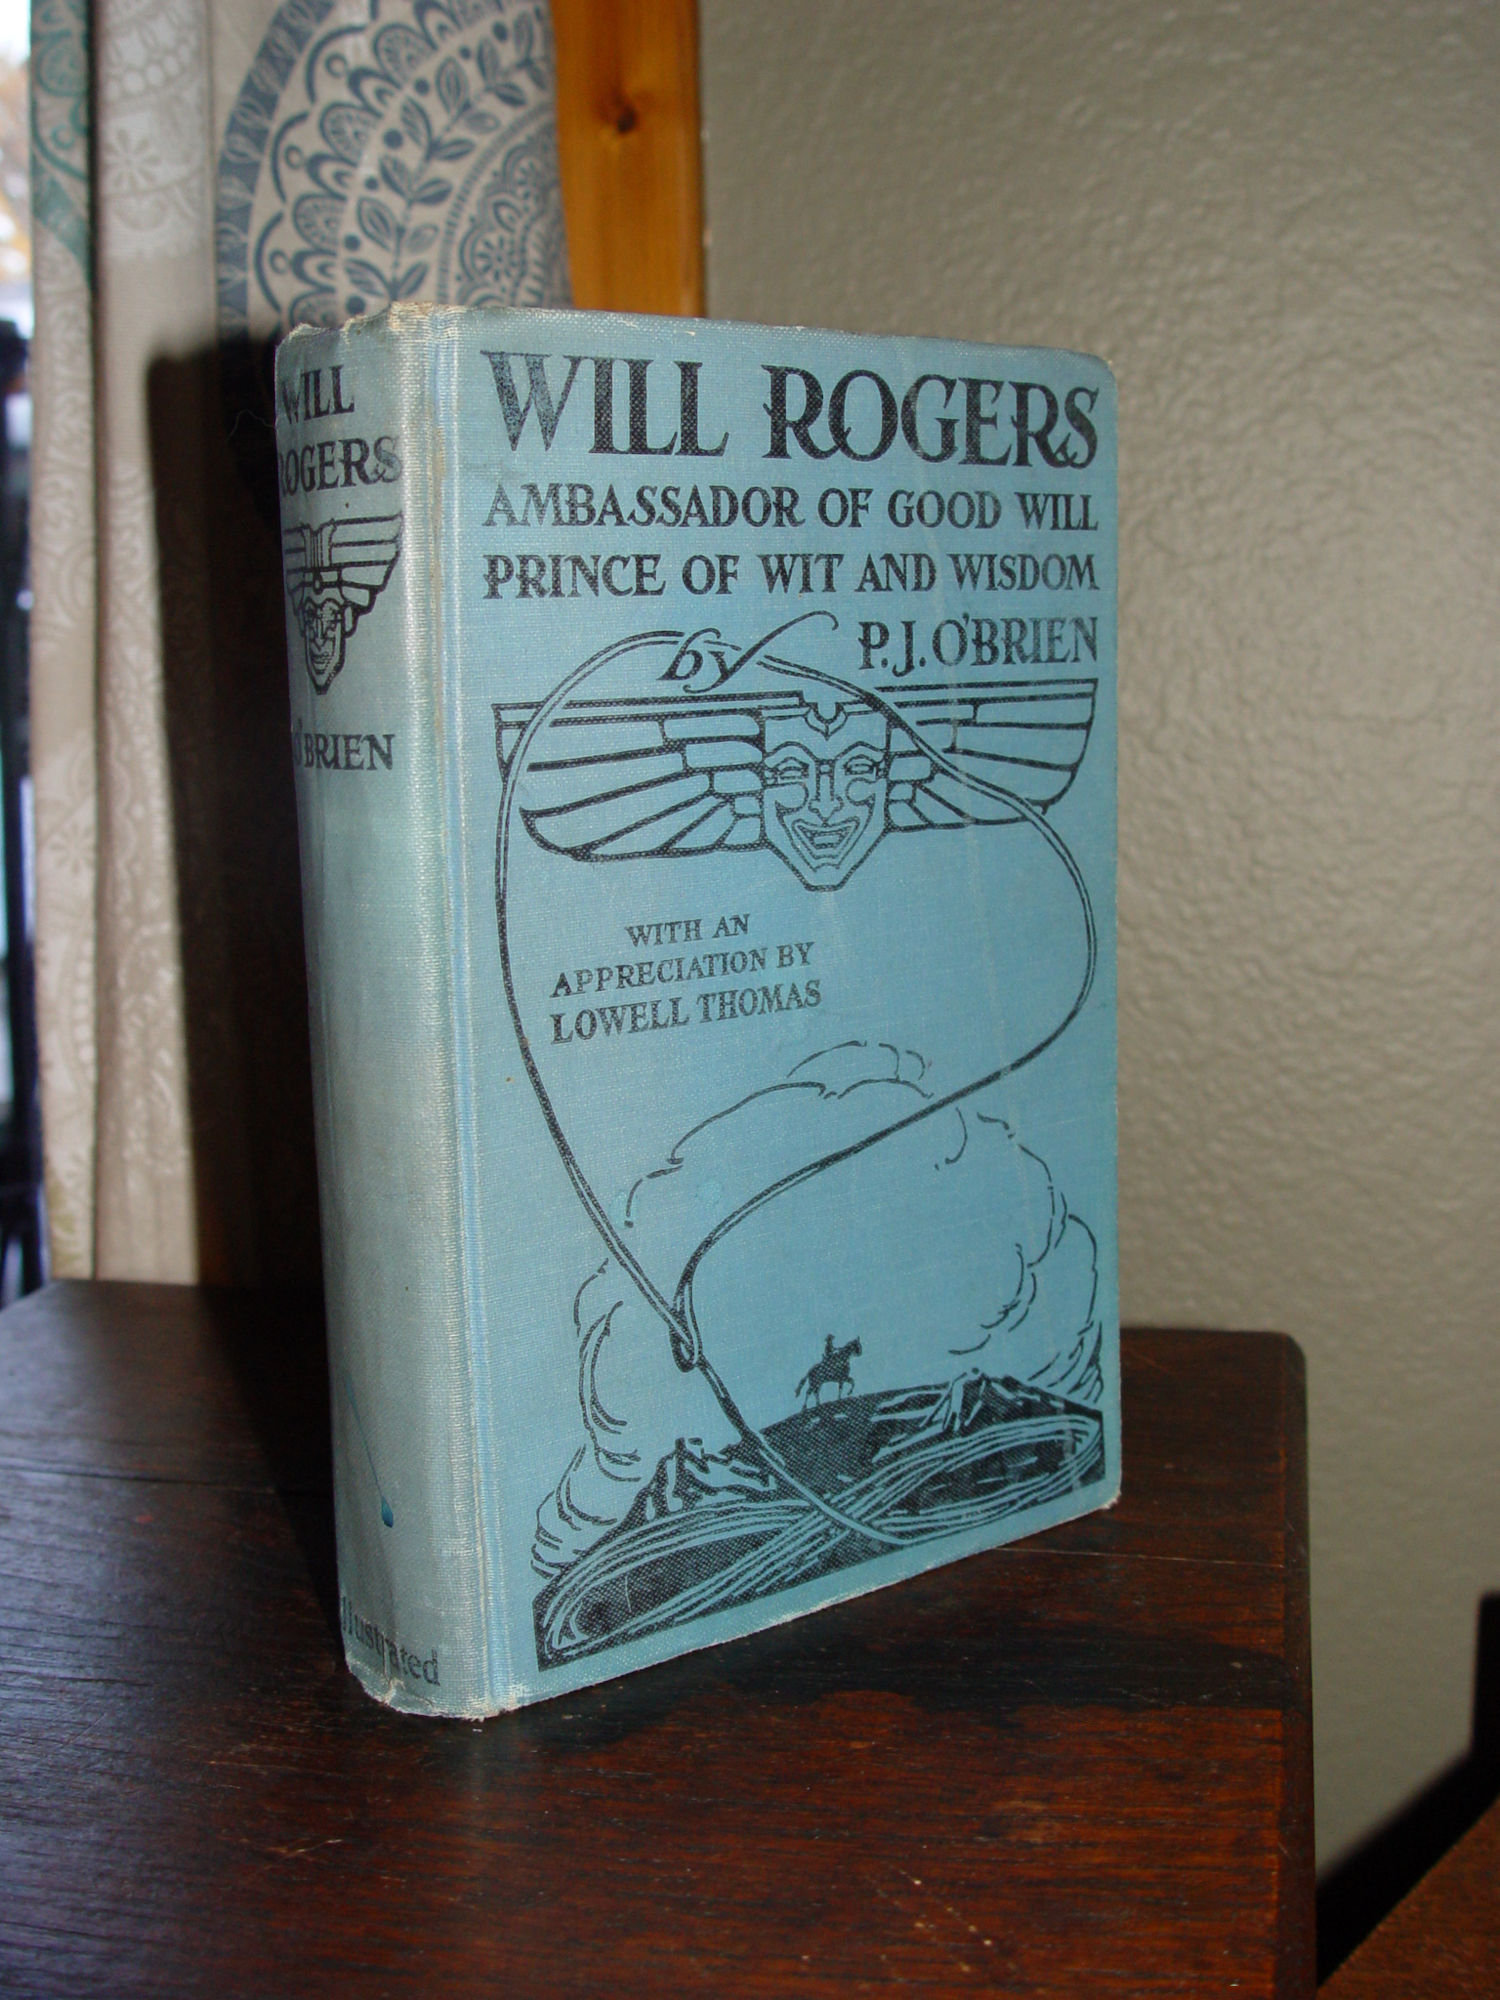 1935 Will Rogers
                        Ambassador of Goodwill Prince of Wit &
                        Wisdom by PJ O'Brien